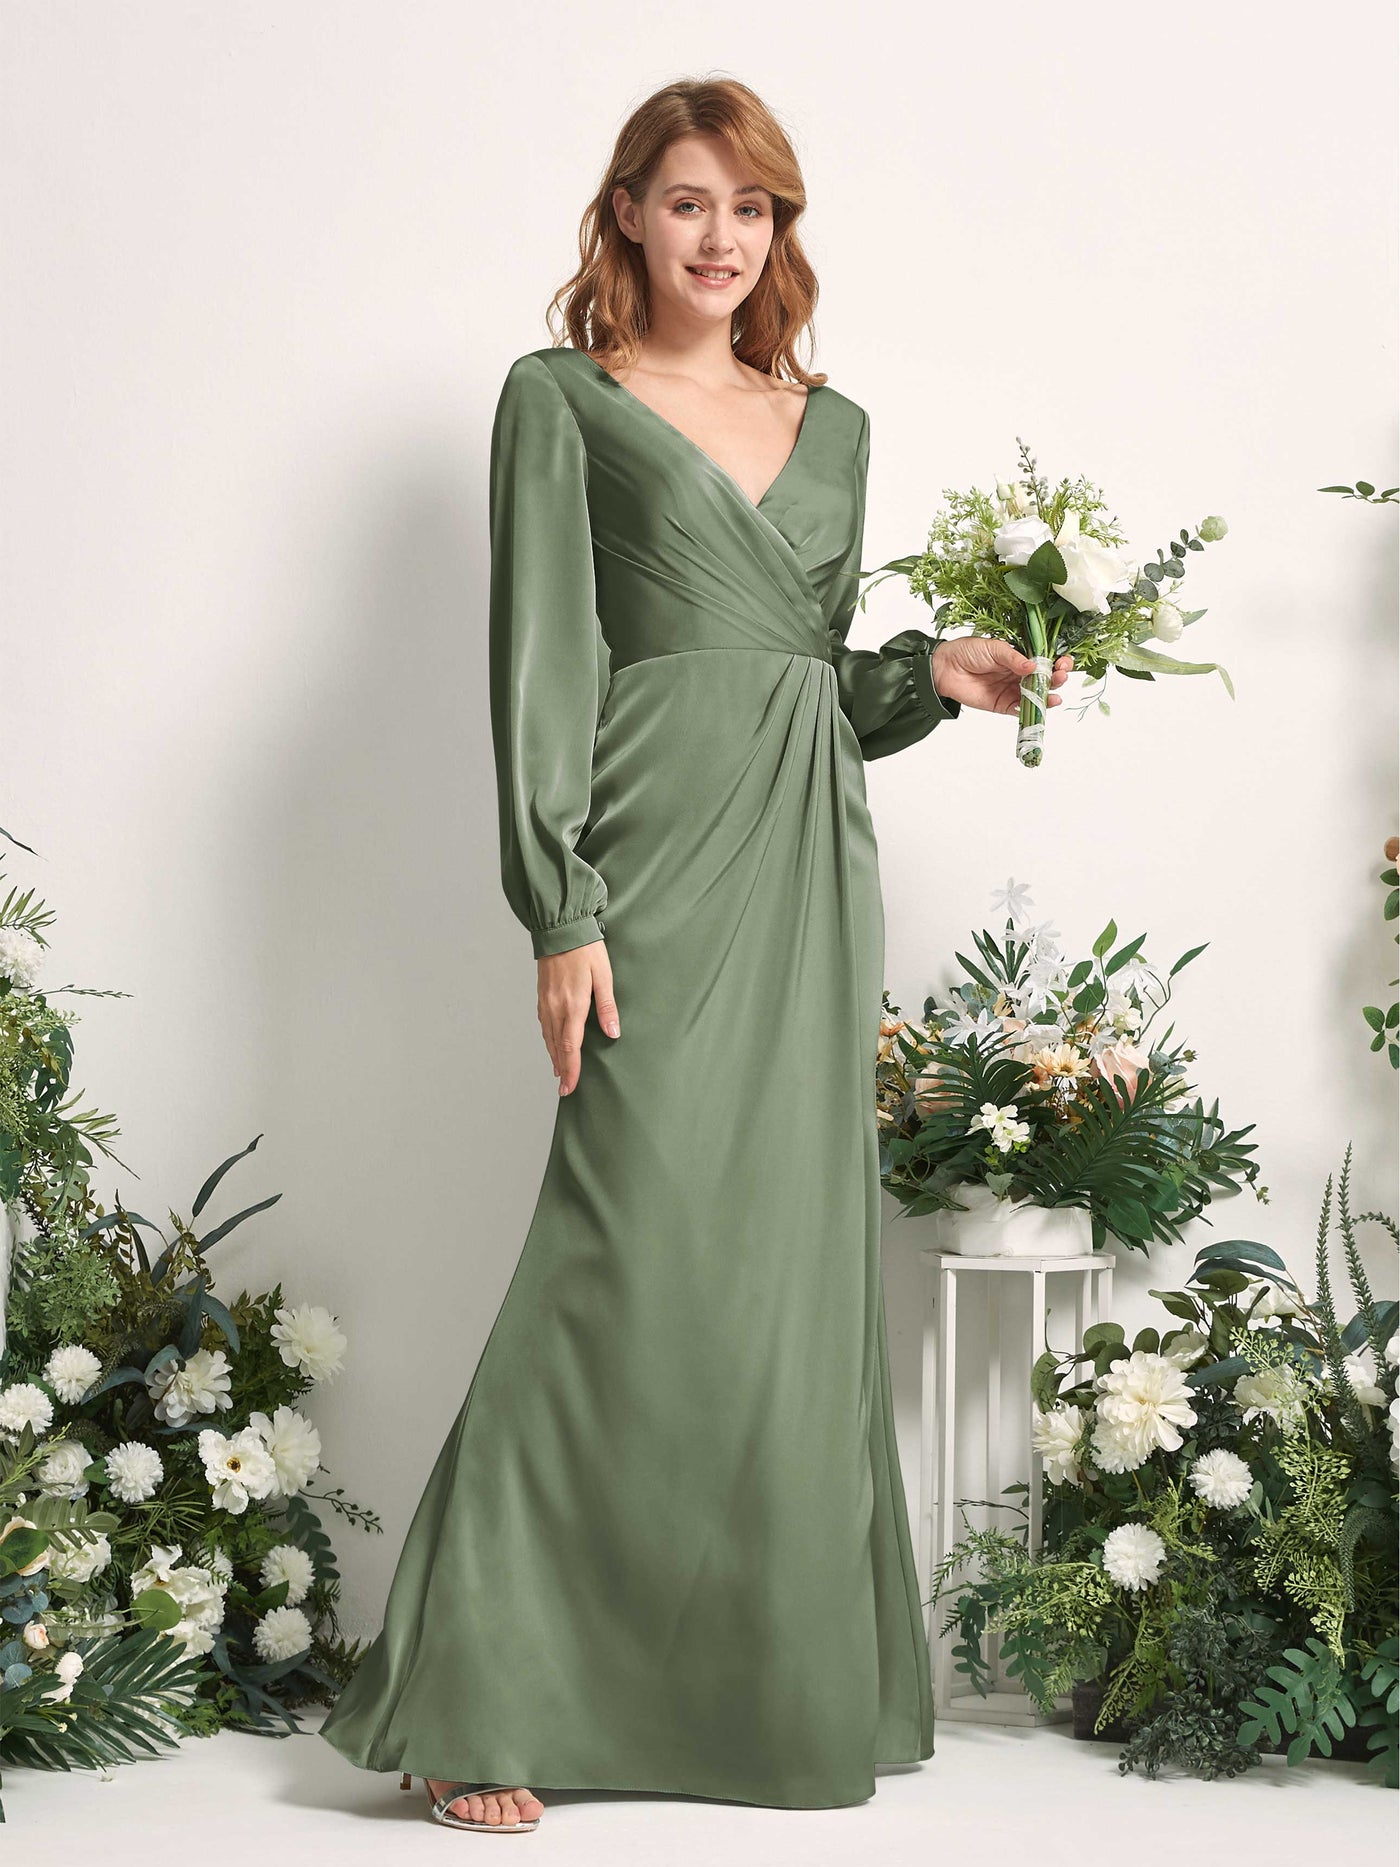 Green Olive Bridesmaid Dresses Bridesmaid Dress Ball Gown Satin V-neck Full Length Long Sleeves Wedding Party Dress (80225170)#color_green-olive